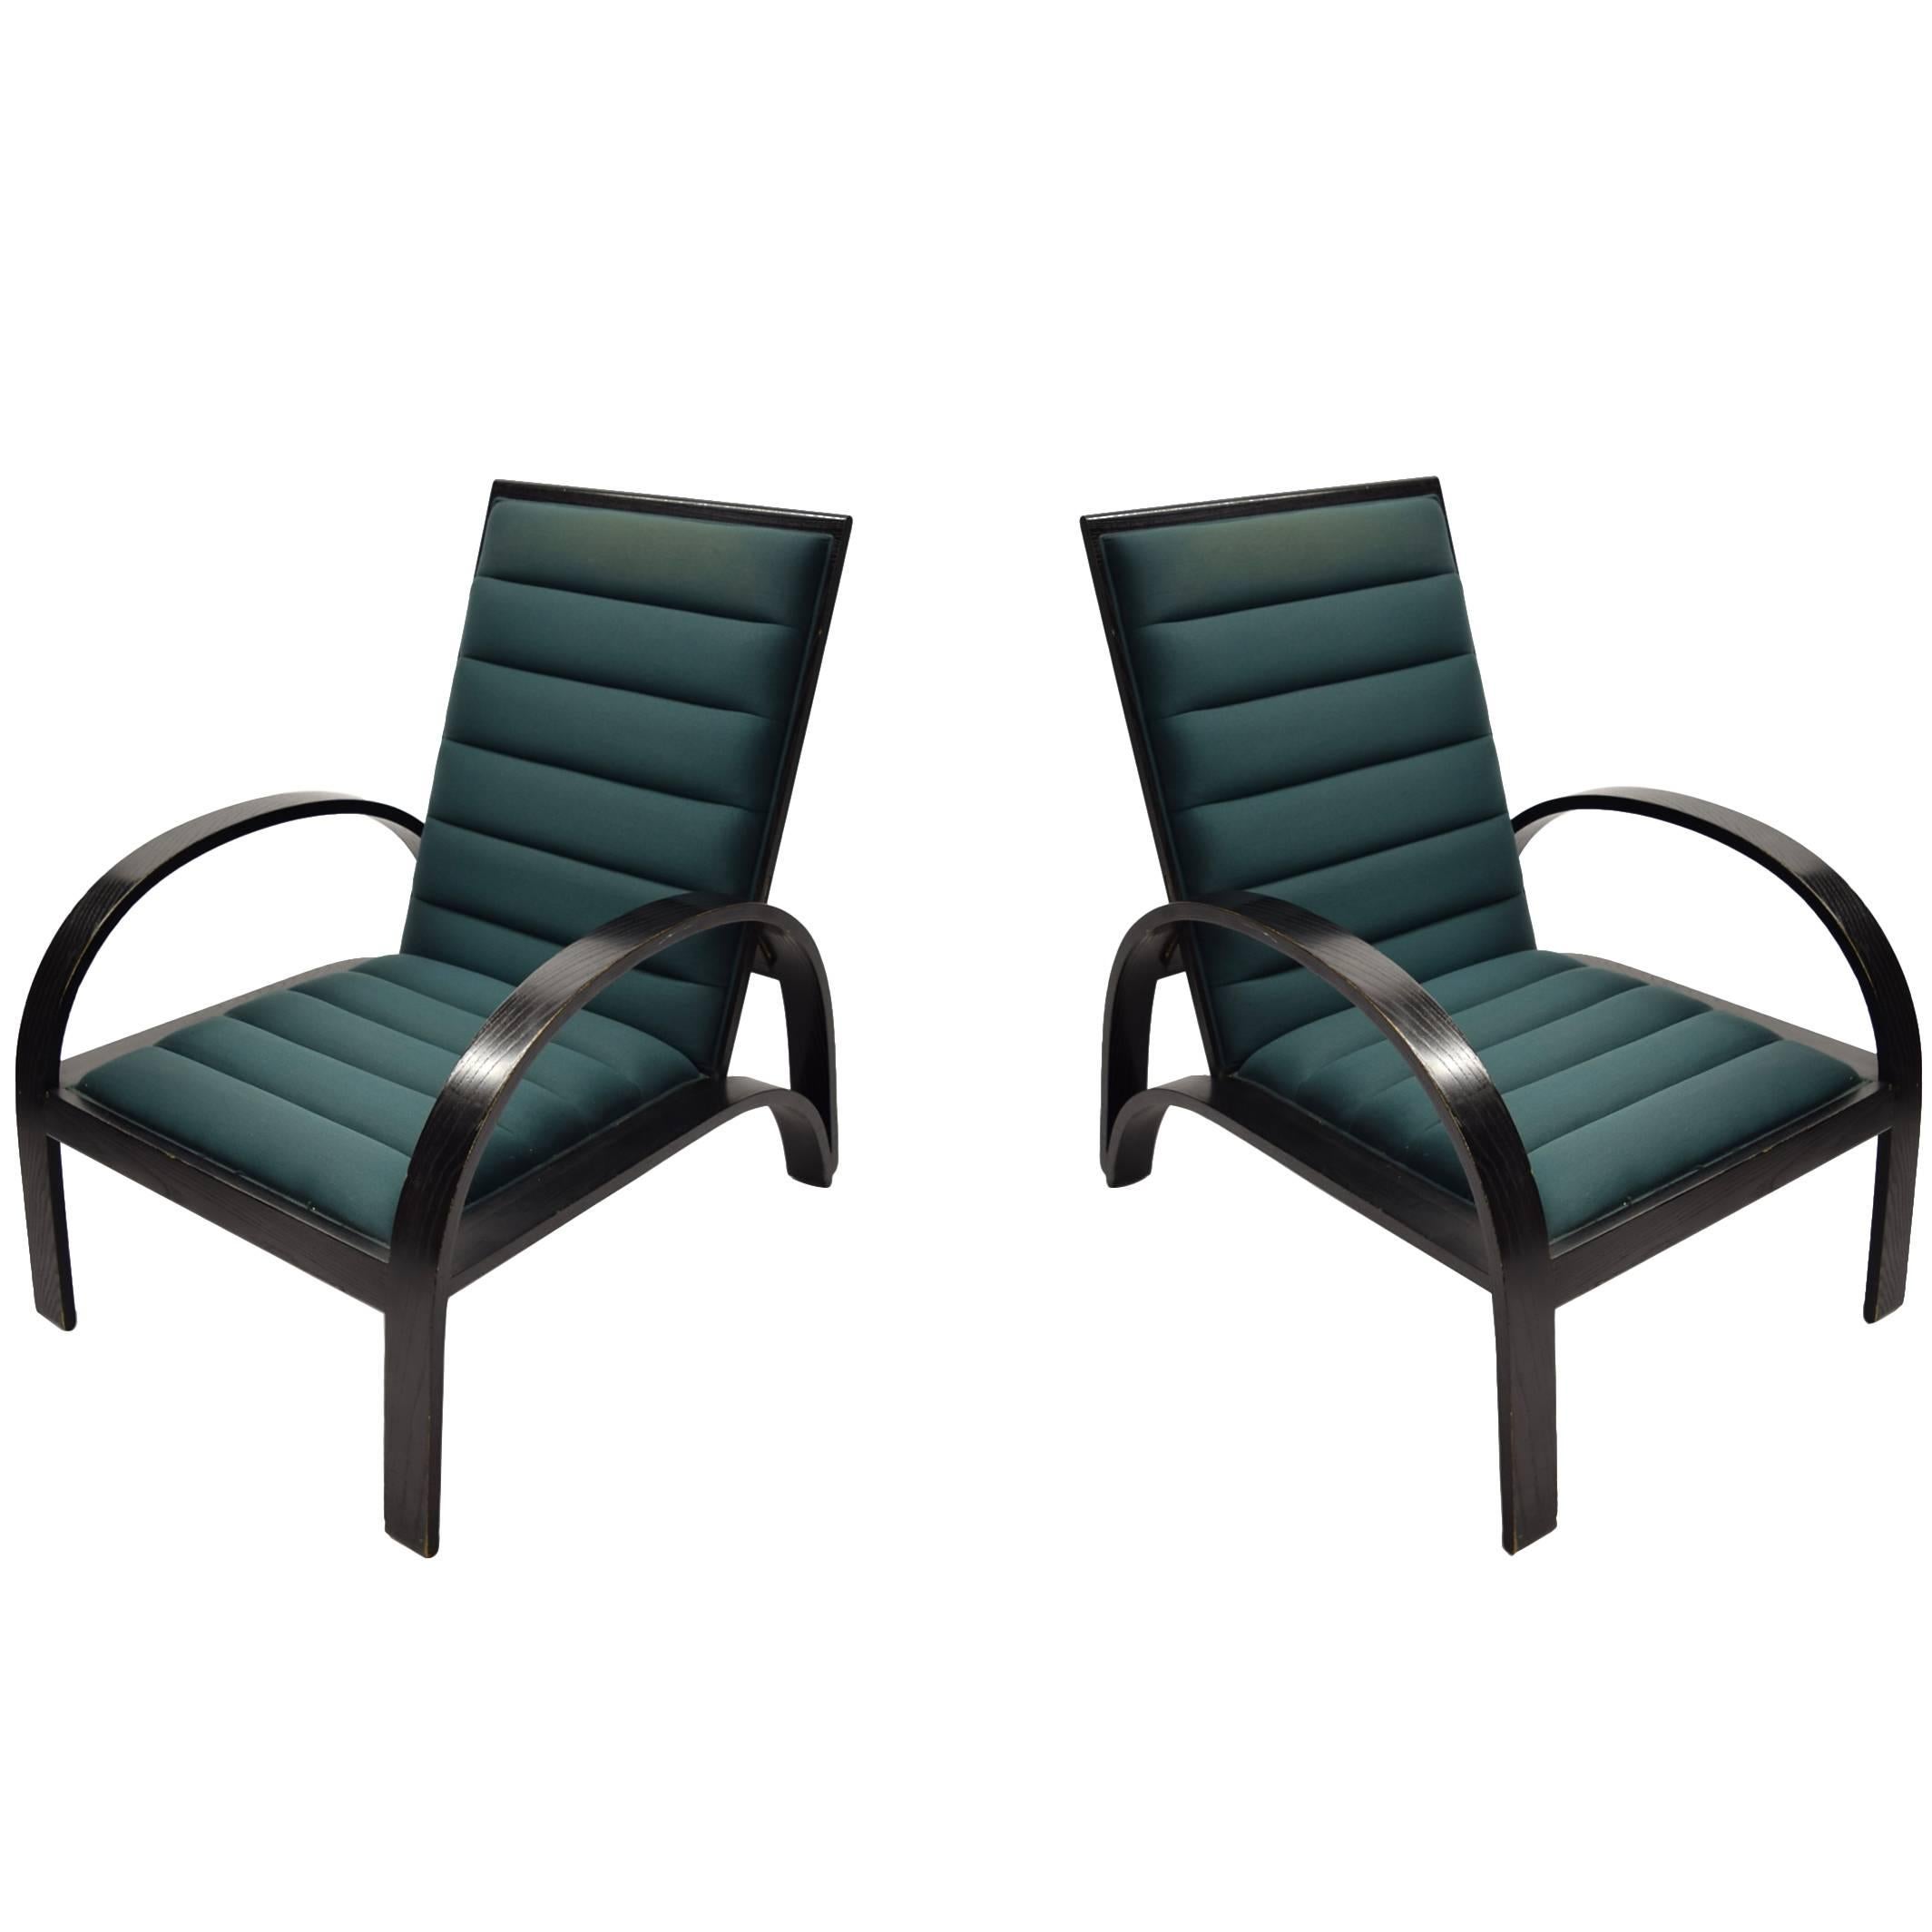 Pair of Reclining Lounge Chairs by Ward Bennett for Brickel, USA 1960s